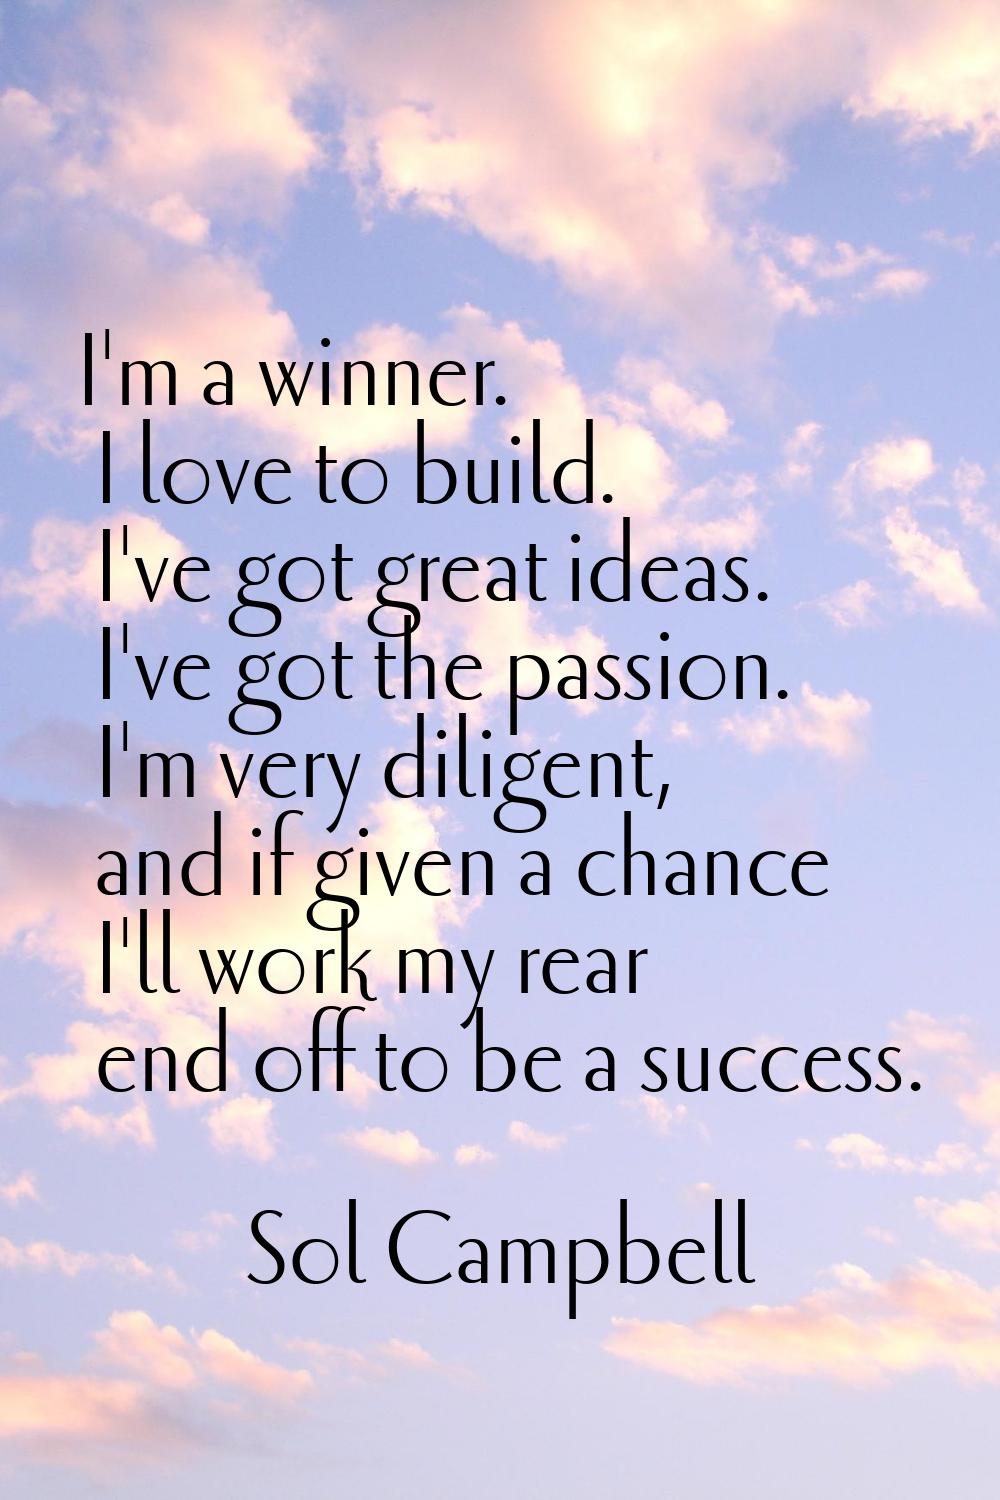 I'm a winner. I love to build. I've got great ideas. I've got the passion. I'm very diligent, and i